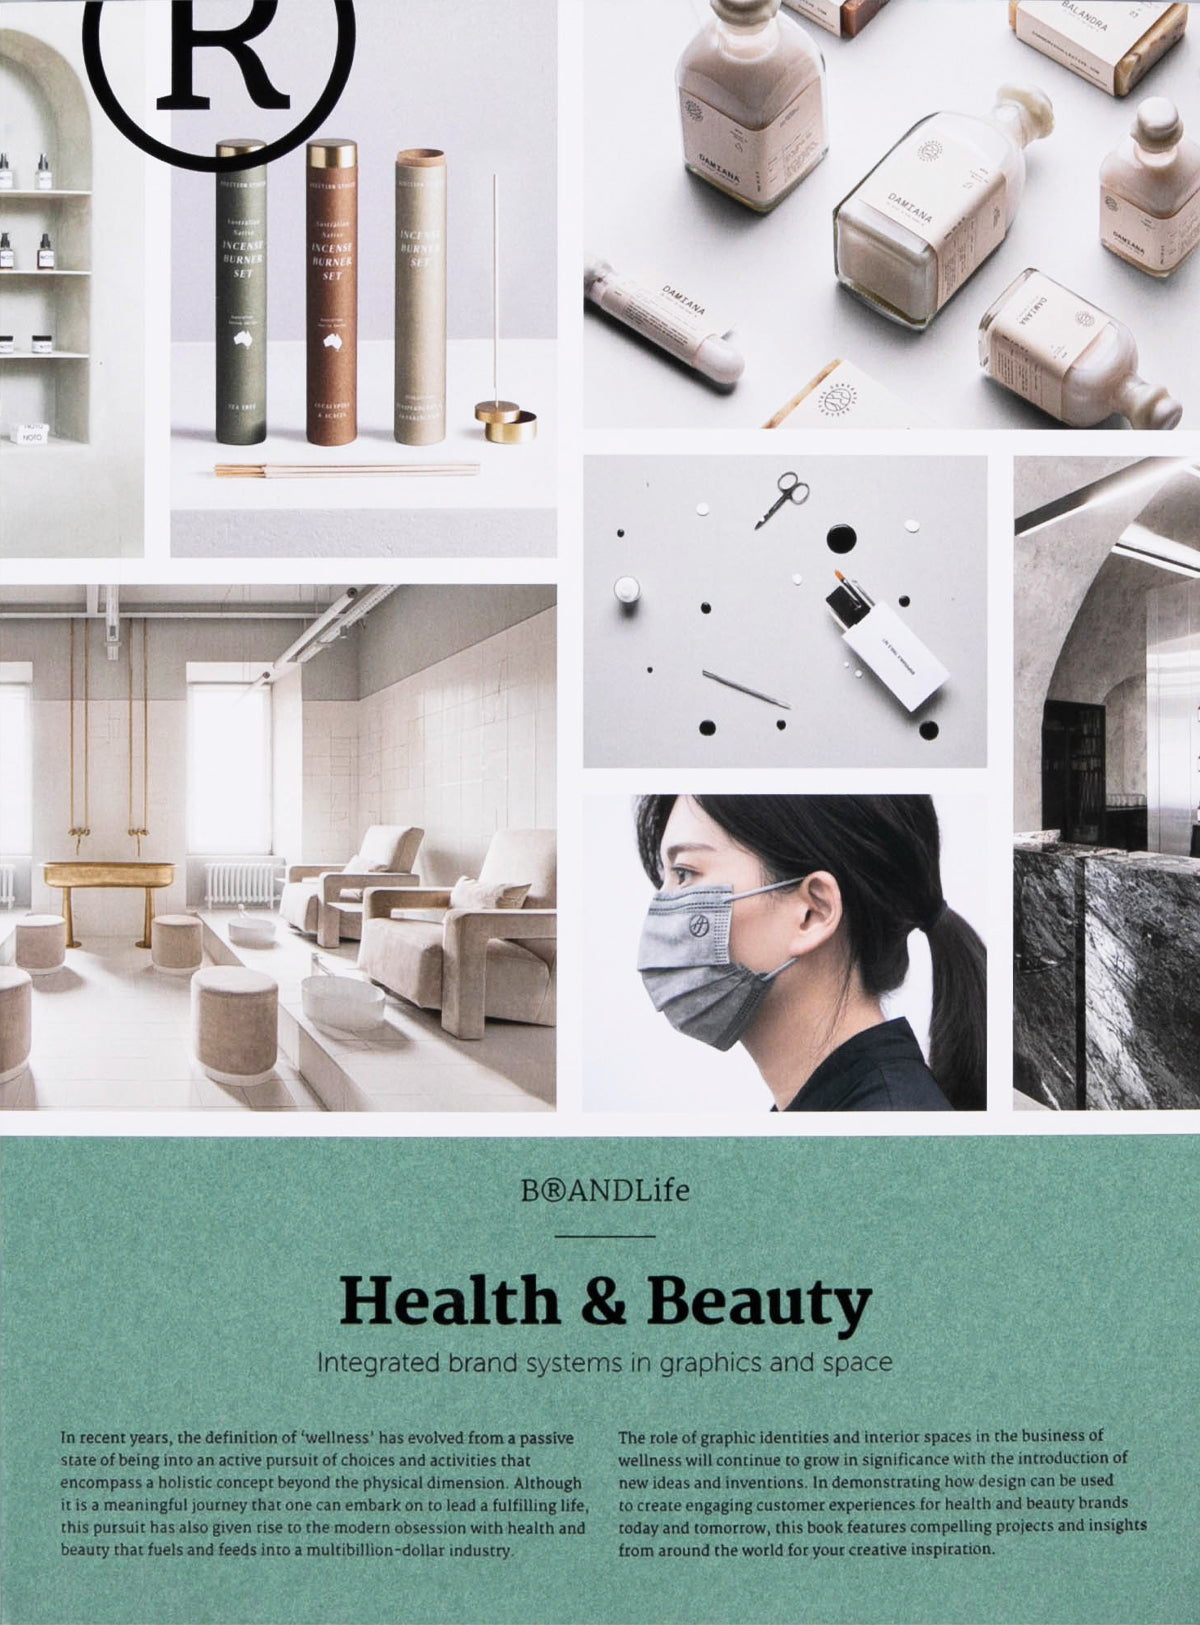 BRANDLife: Health & Beauty: Integrated brand systems in graphics and space